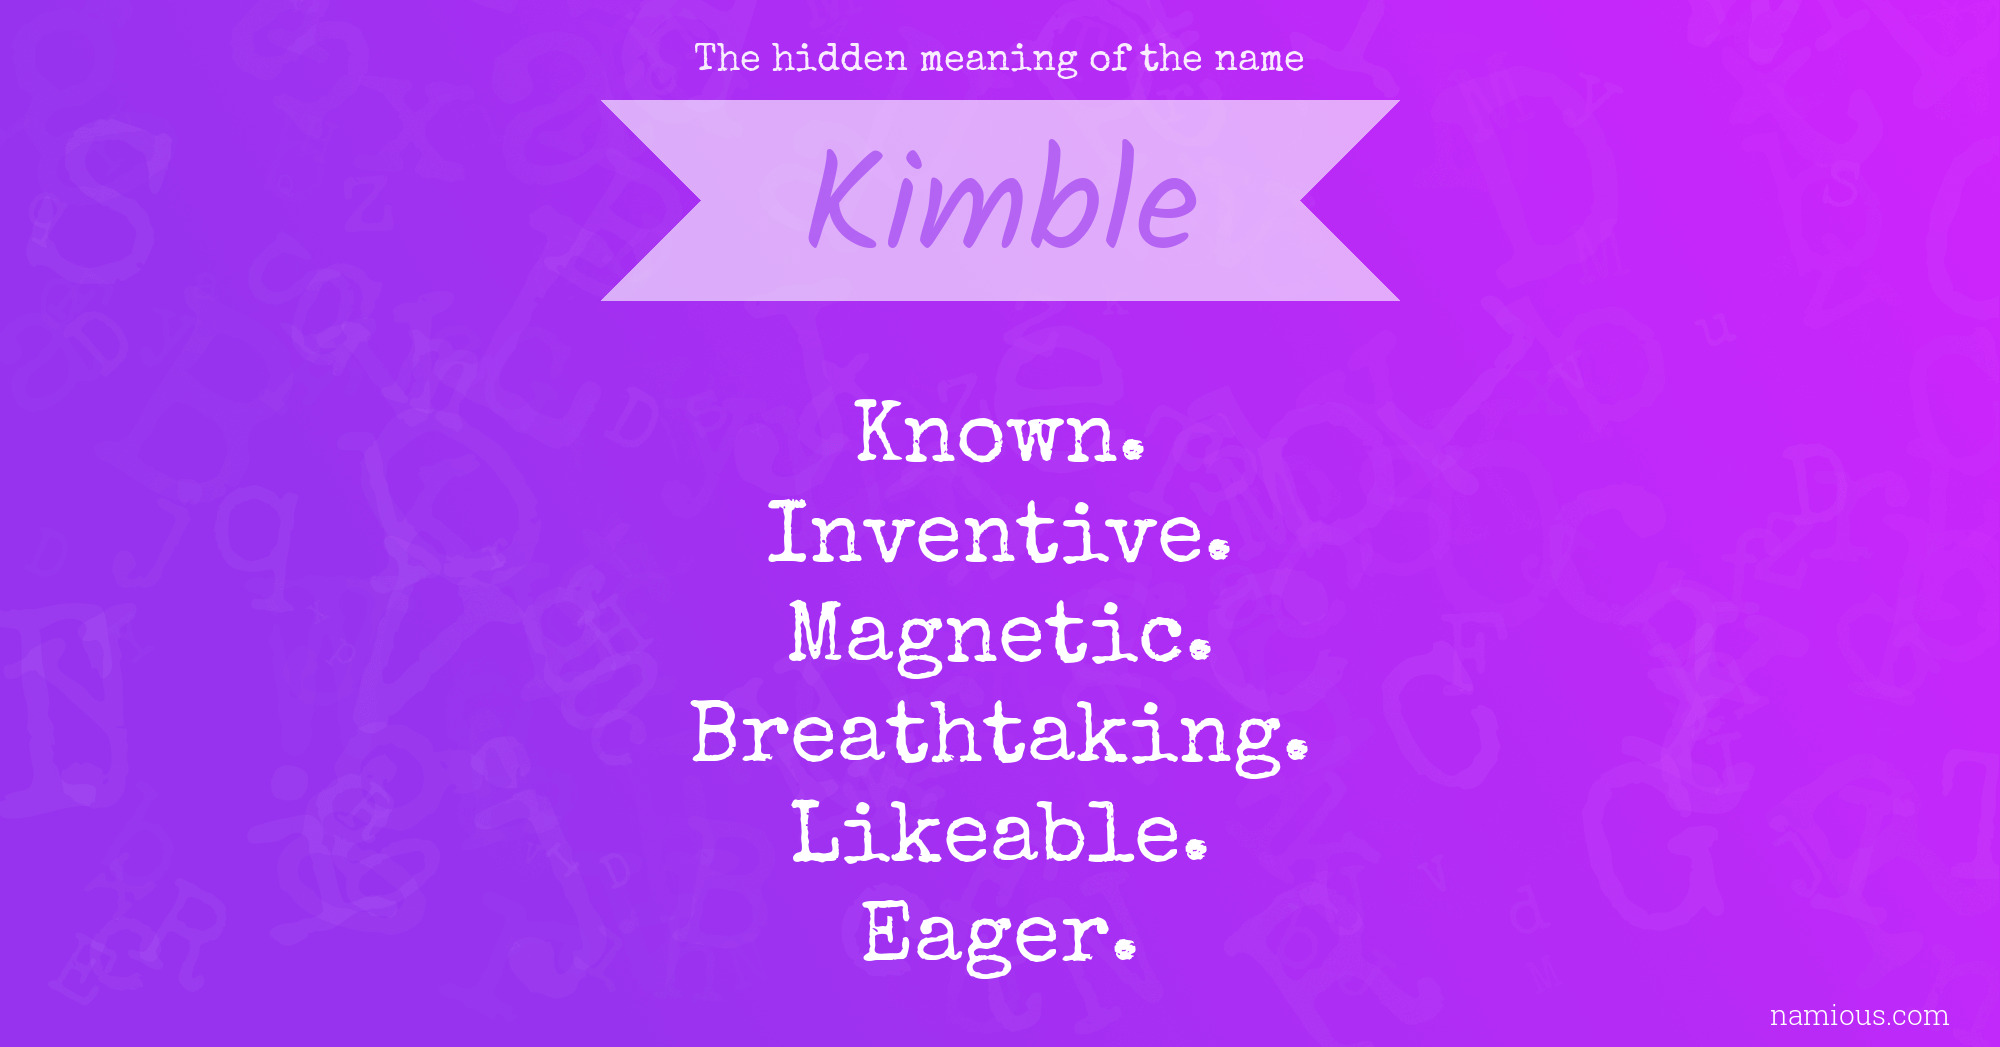 The hidden meaning of the name Kimble